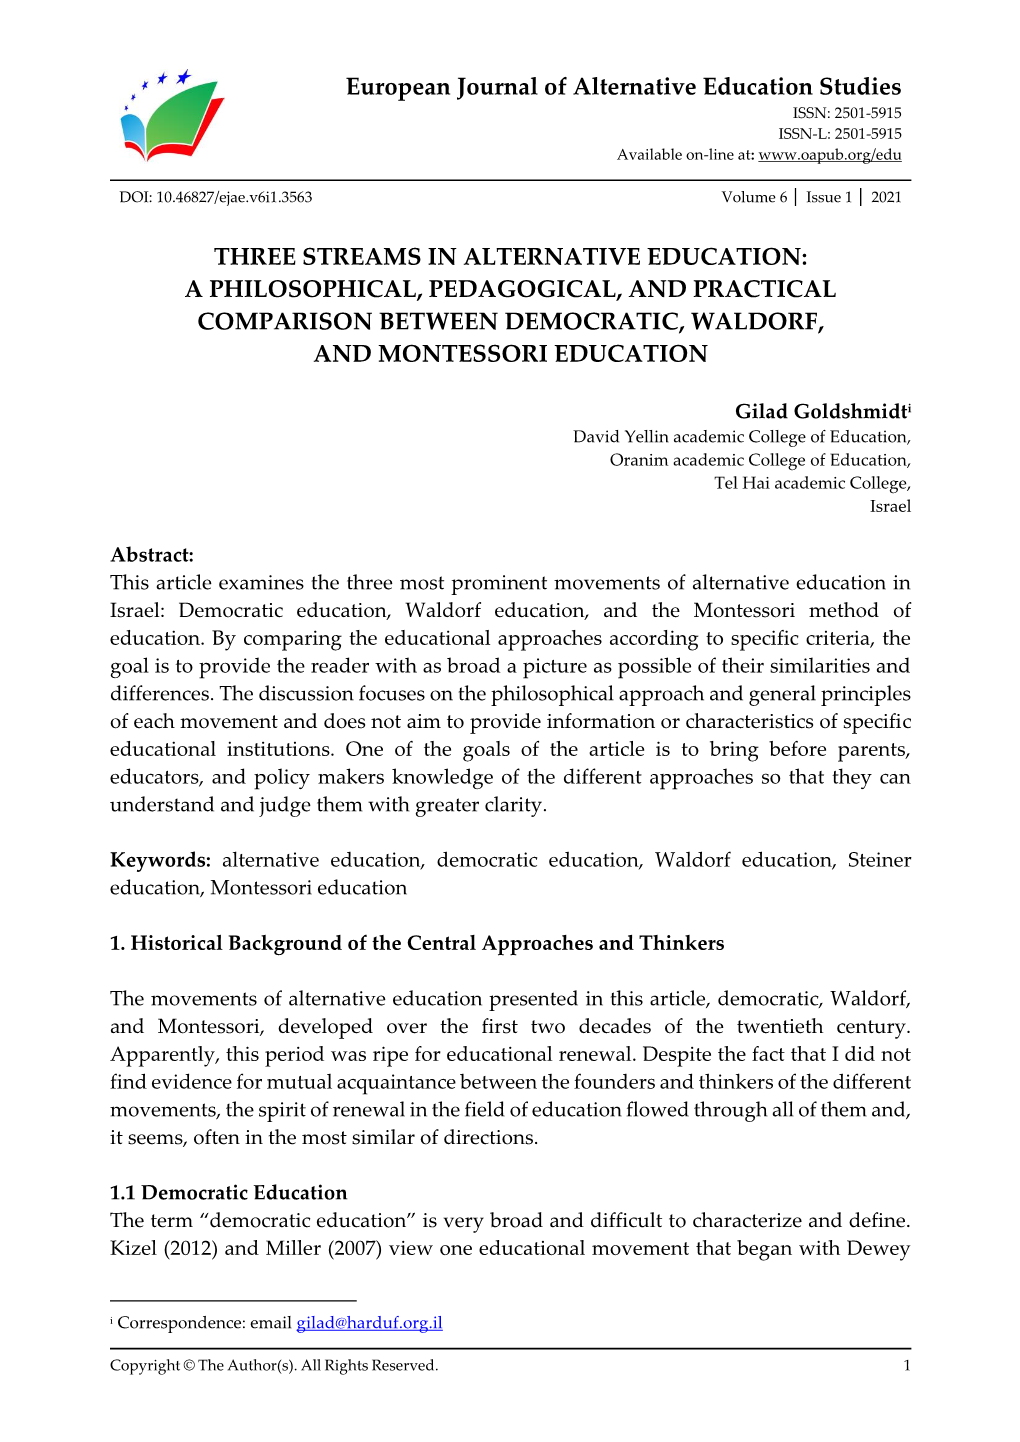 European Journal of Alternative Education Studies ISSN: 2501-5915 ISSN-L: 2501-5915 Available On-Line At